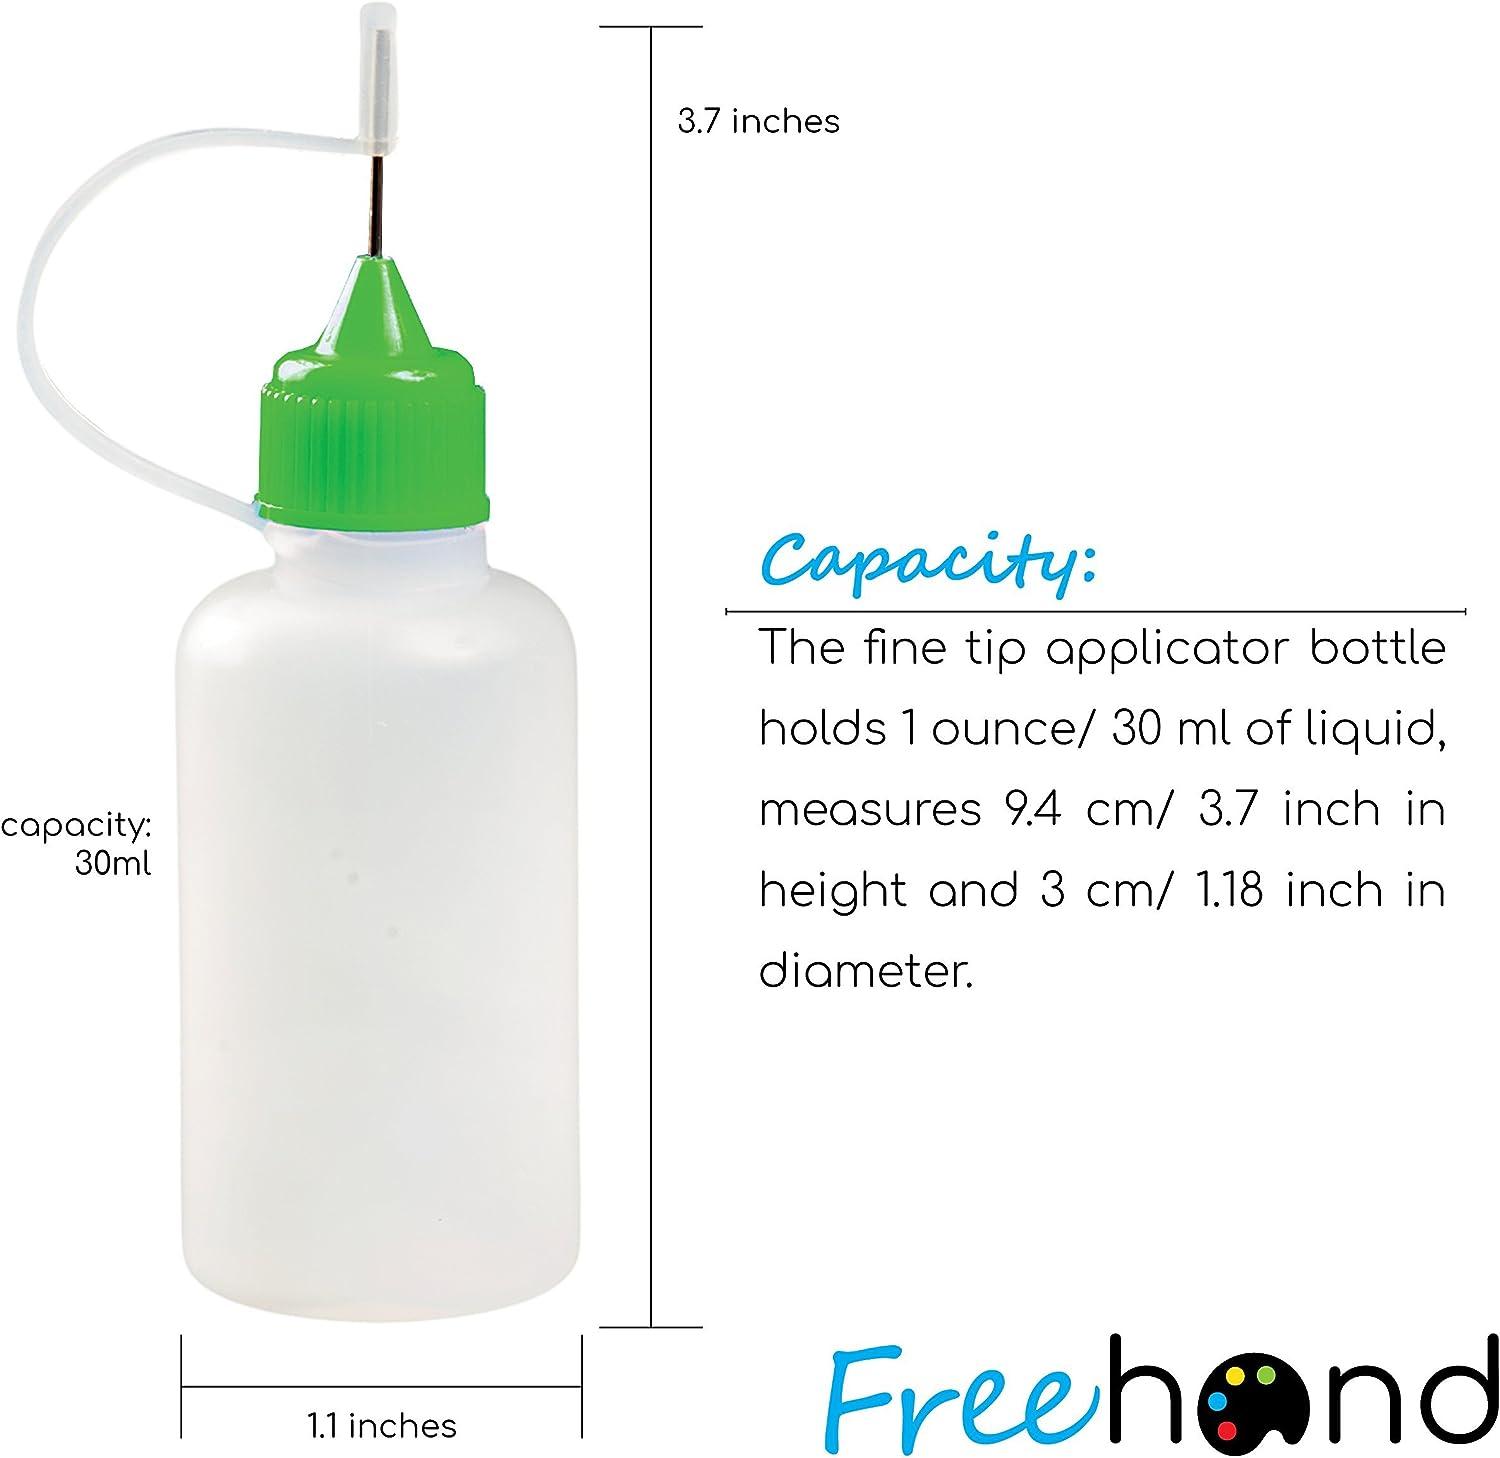 Precision Tip Applicator Bottle Four 1 Oz. Bottles and 12 Tips for  Multi-Purpose Use